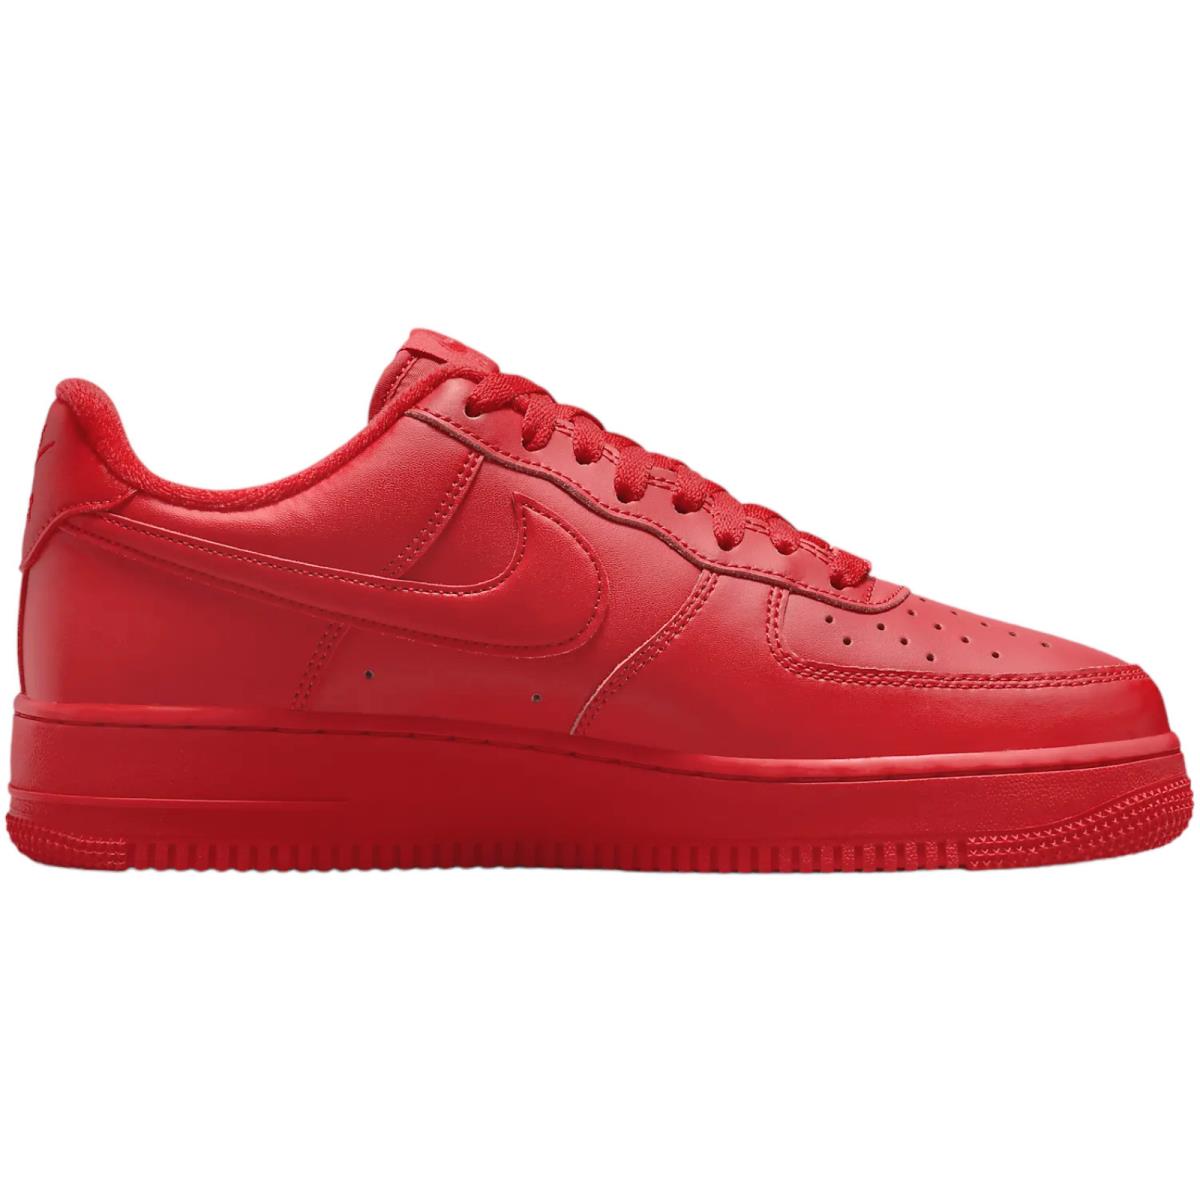 Nike Air Force 1 `07 Men`s Casual Shoes All Colors US Sizes 7-14 University Red/Black/University Red